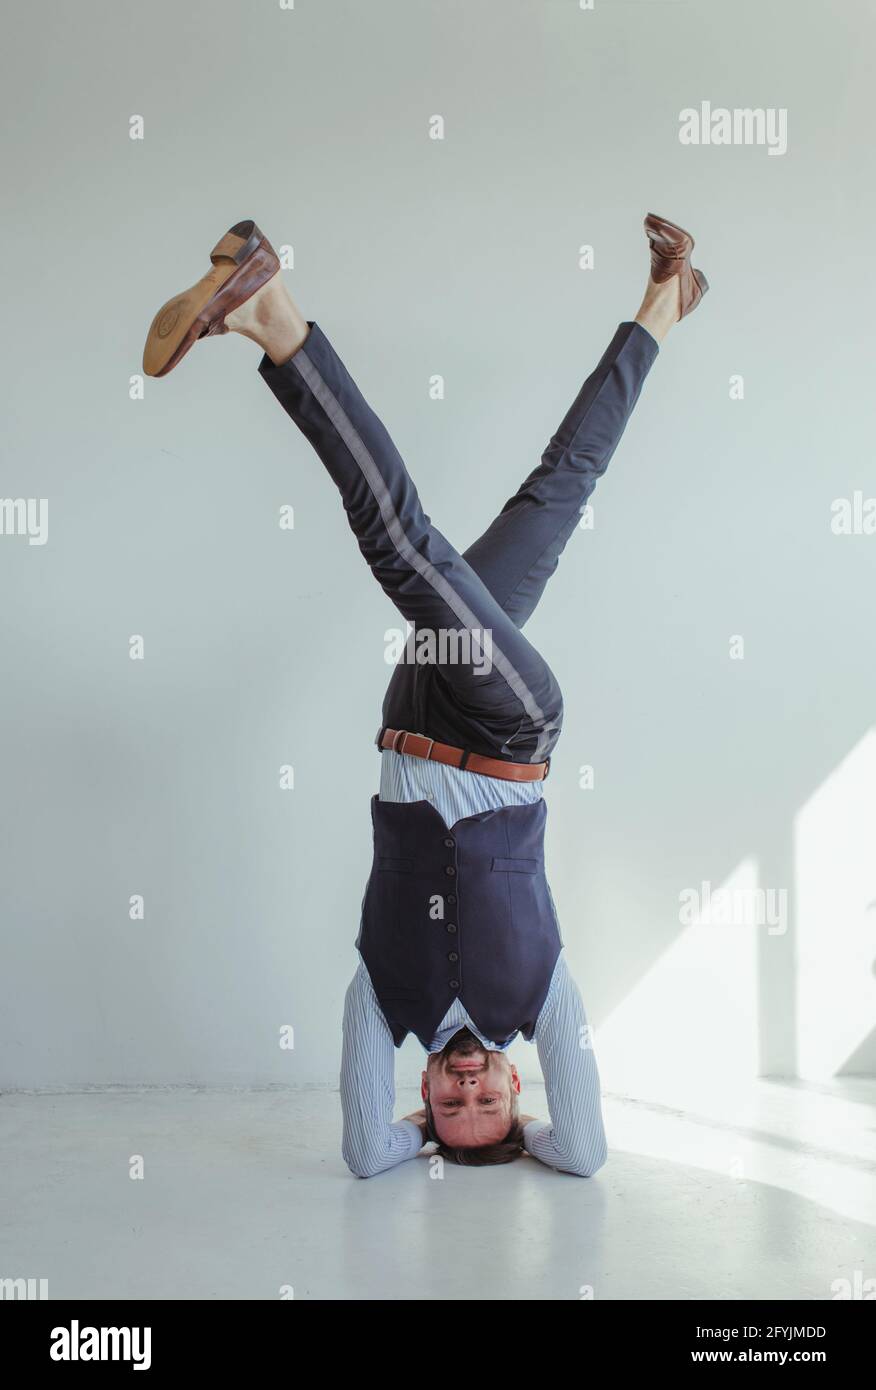 Portrait of a smiling man in a shirt and waistcoat doing a headstand Stock Photo